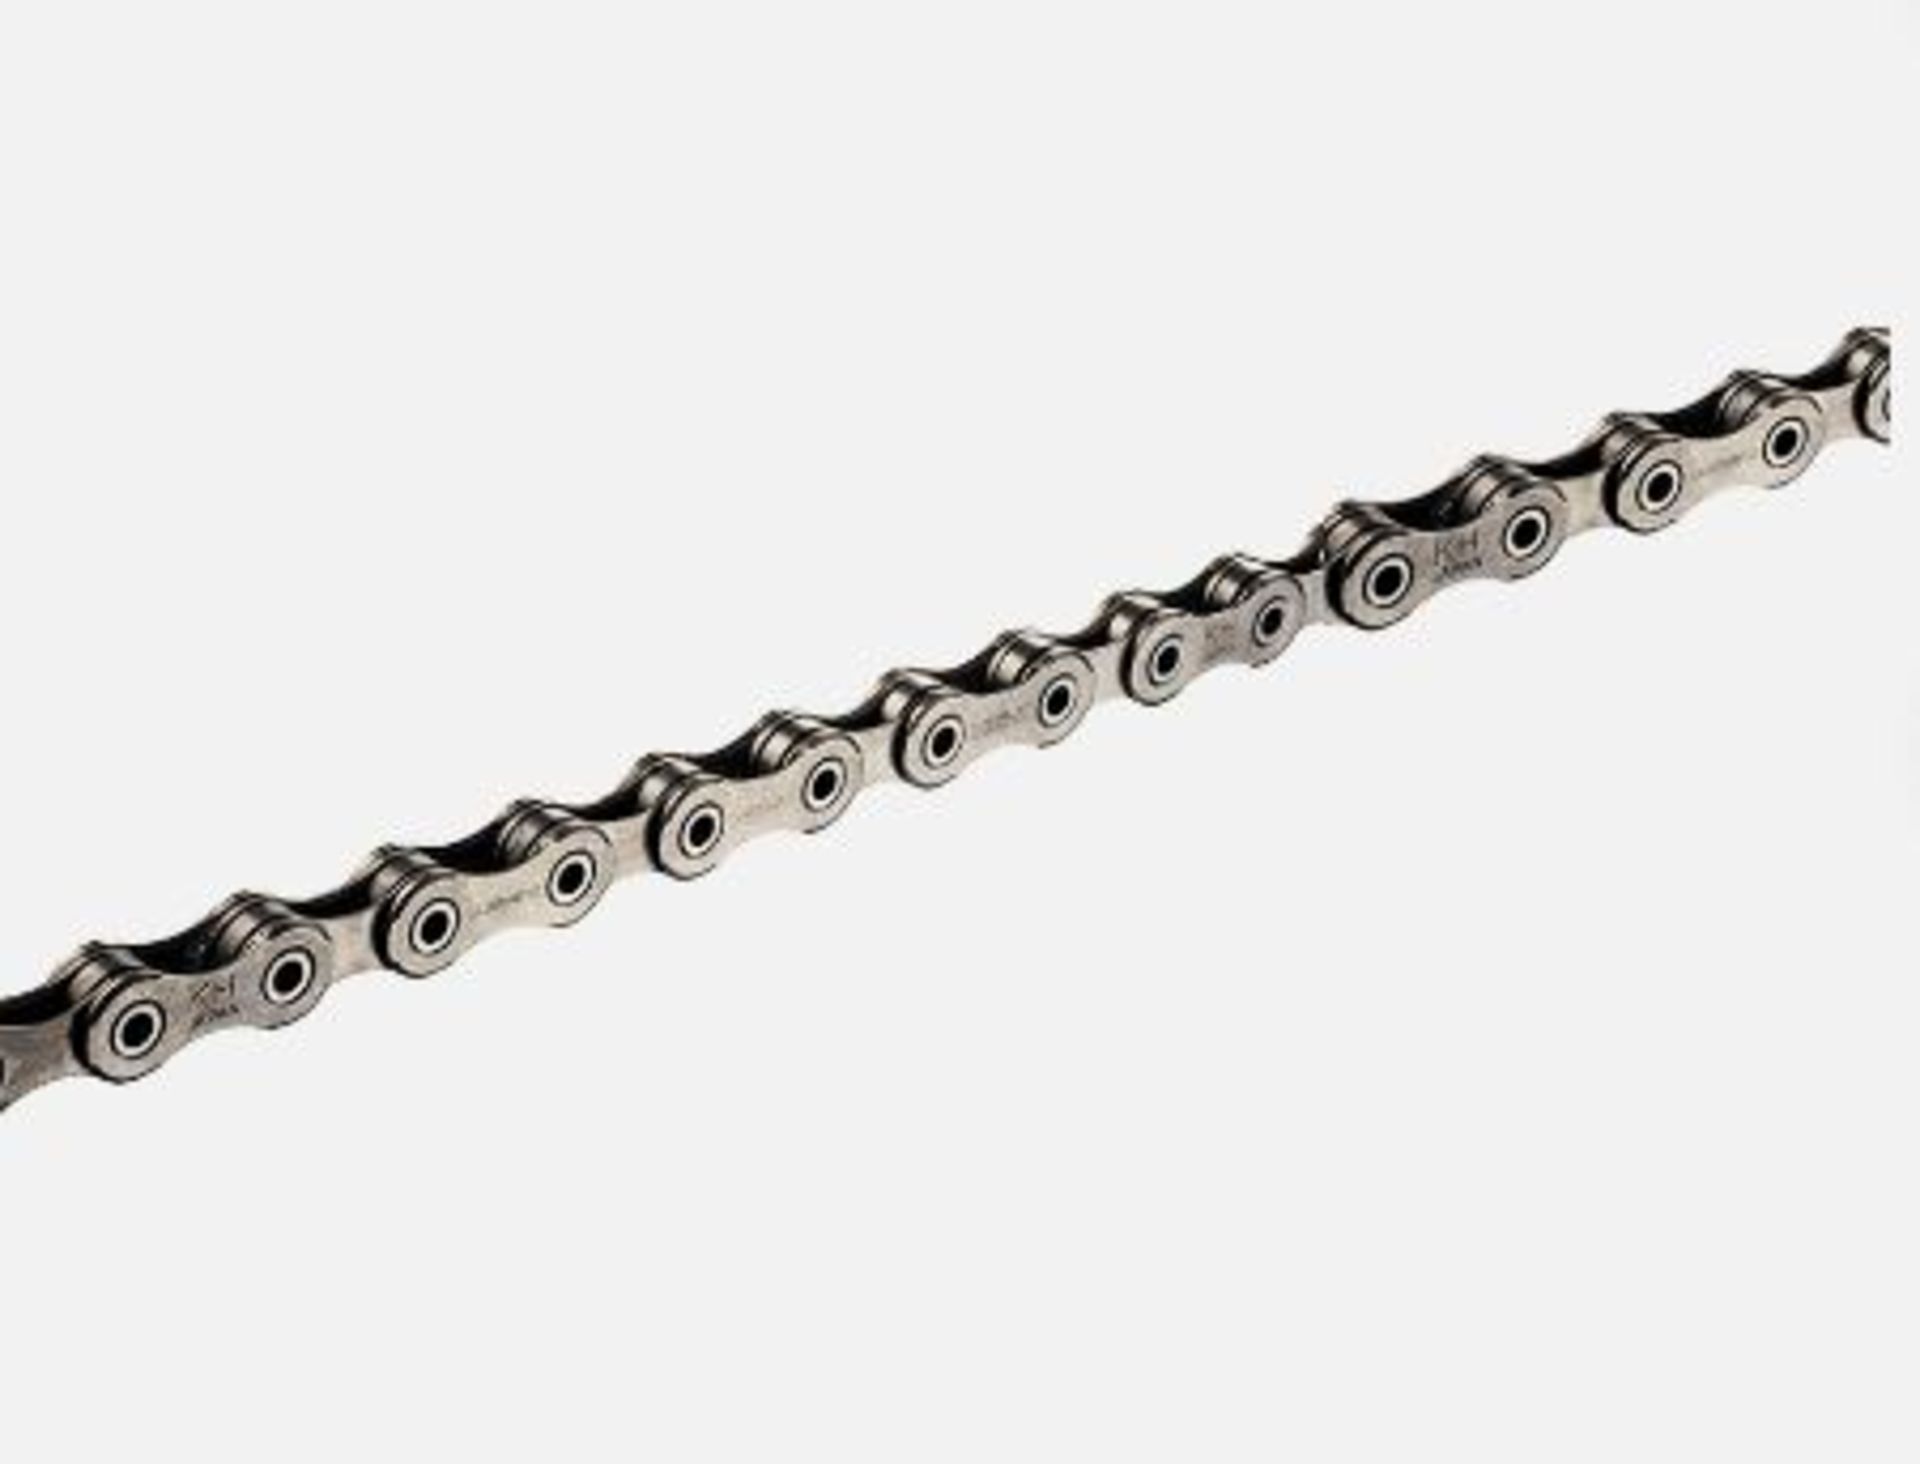 4 x Shimano CN-HG95 Deore XT 10-Speed Mountain Bicycle Chains,116 Links